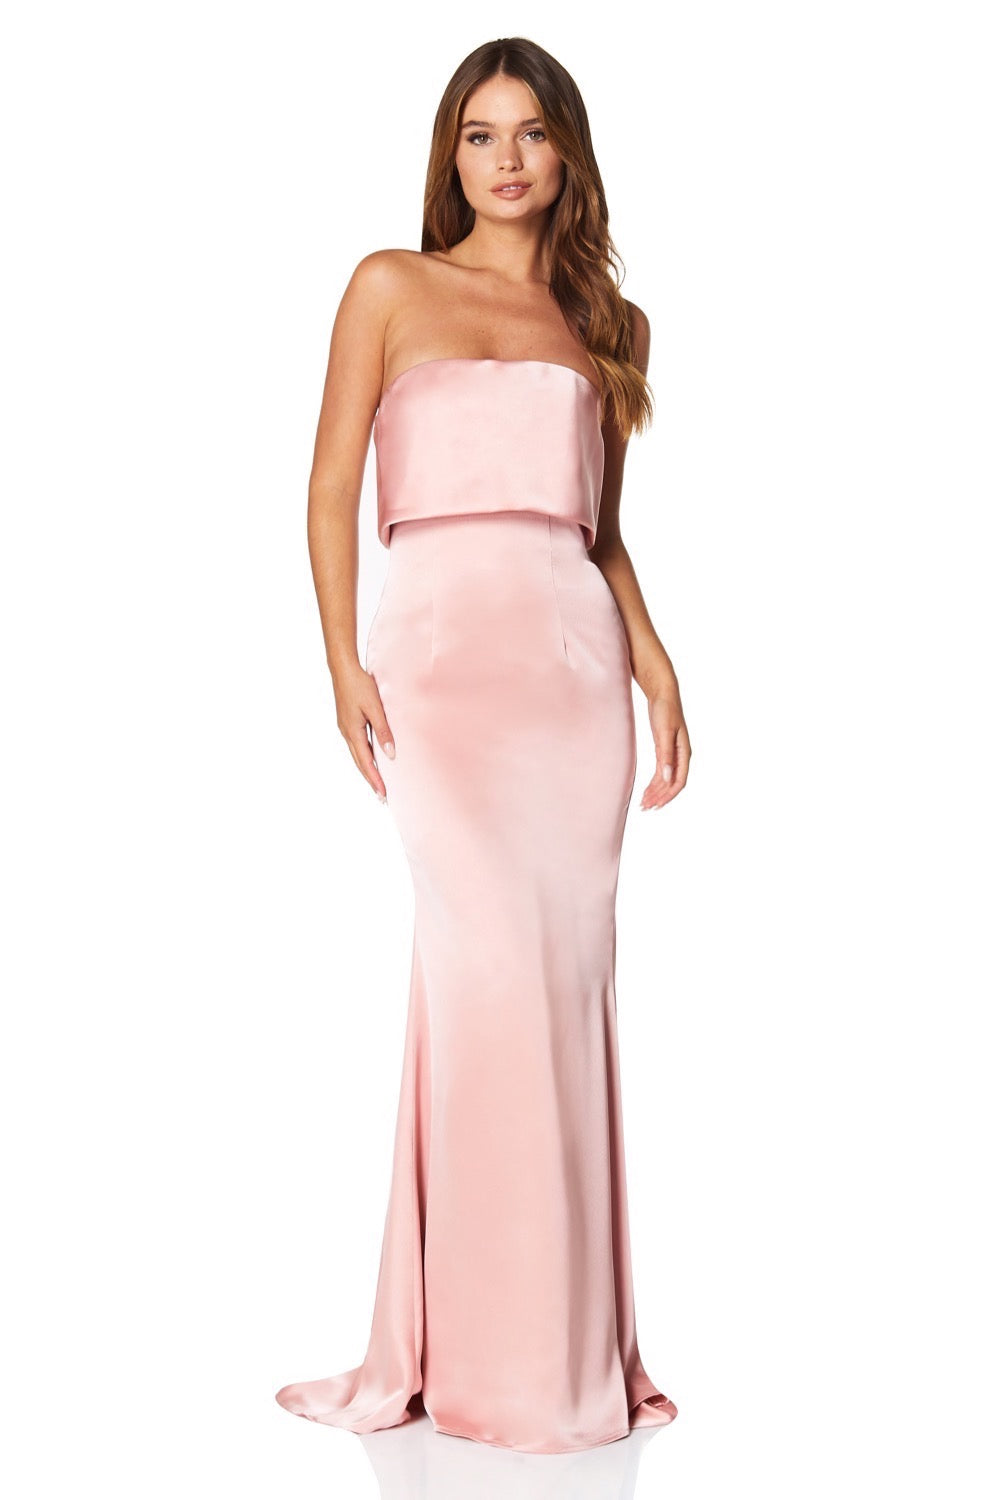 Jetaime Strapless Maxi Dress with Overlay and Button Back Detail, UK 14 / US 10 / EU 42 / Blush